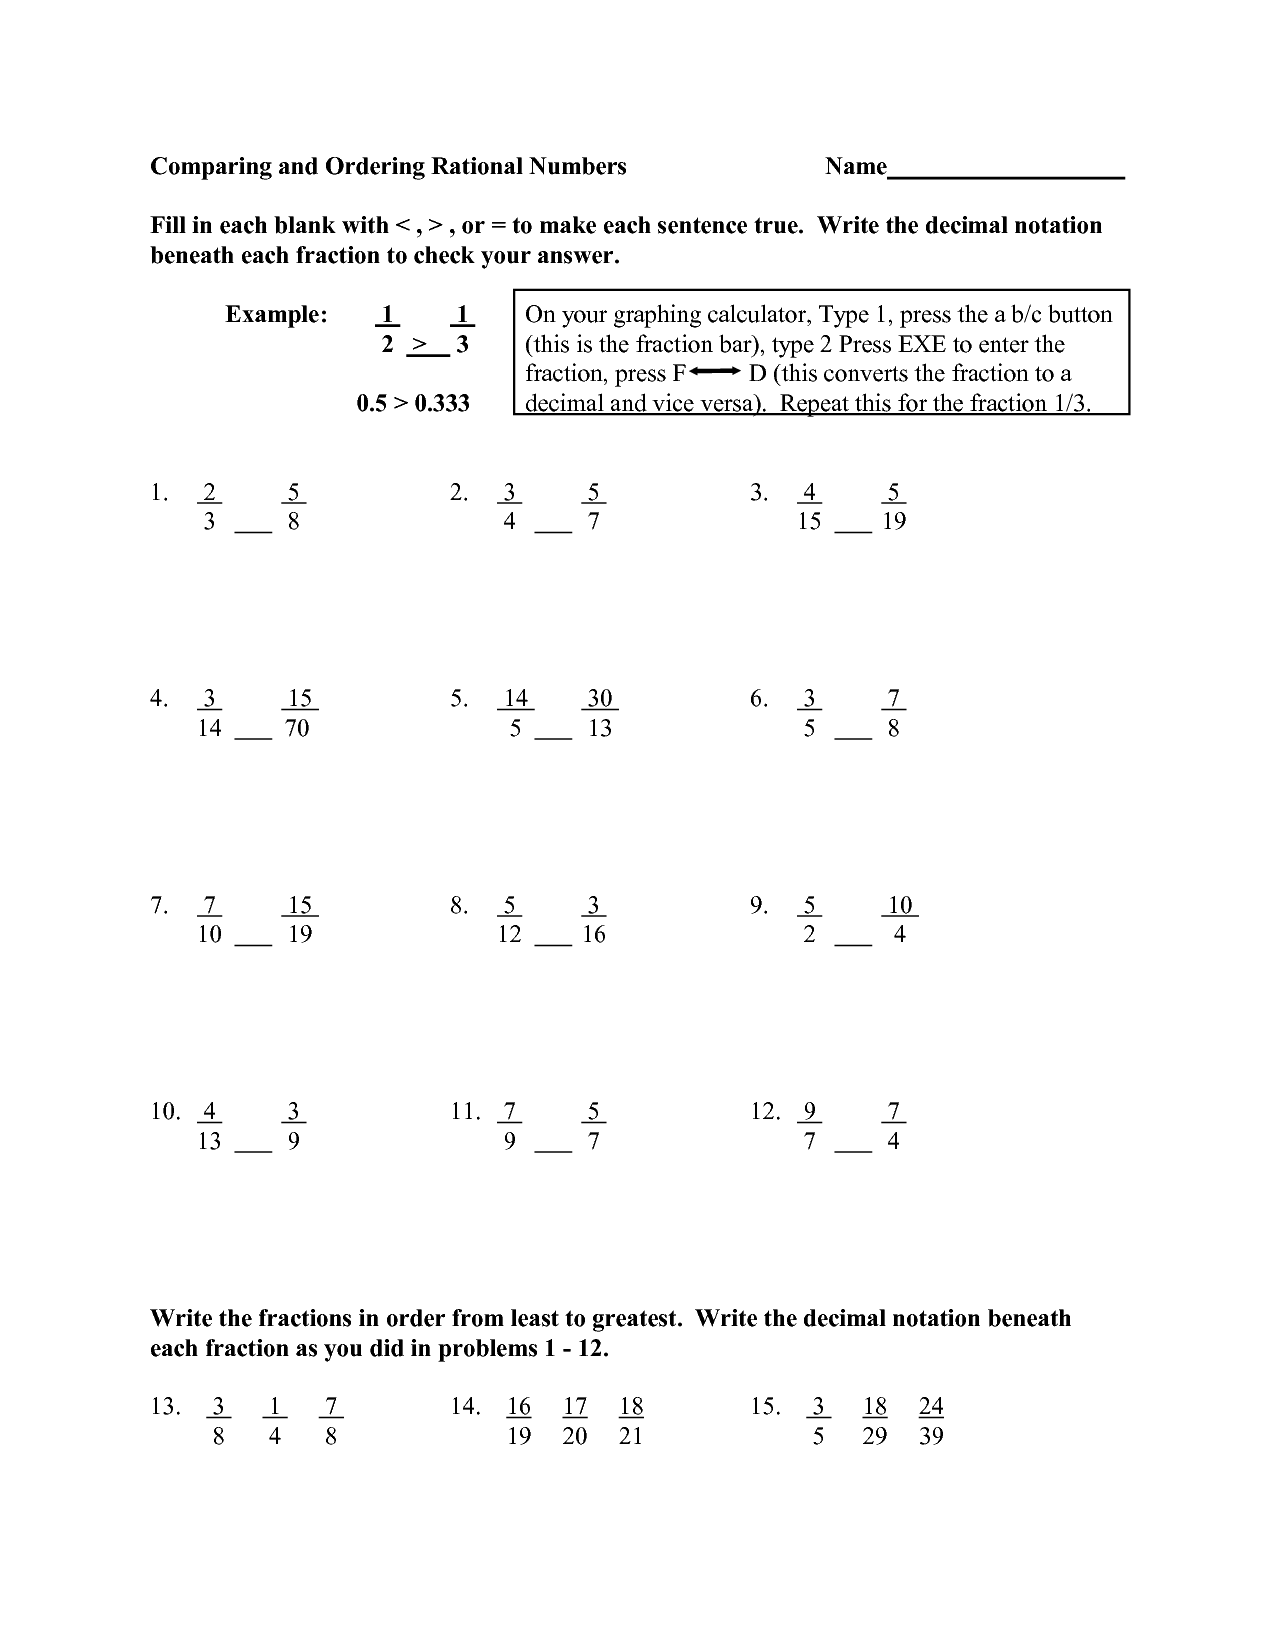 galaxy-coaching-classes-worksheet-class-8-ch-1-rational-numbers-8th-grade-math-worksheets